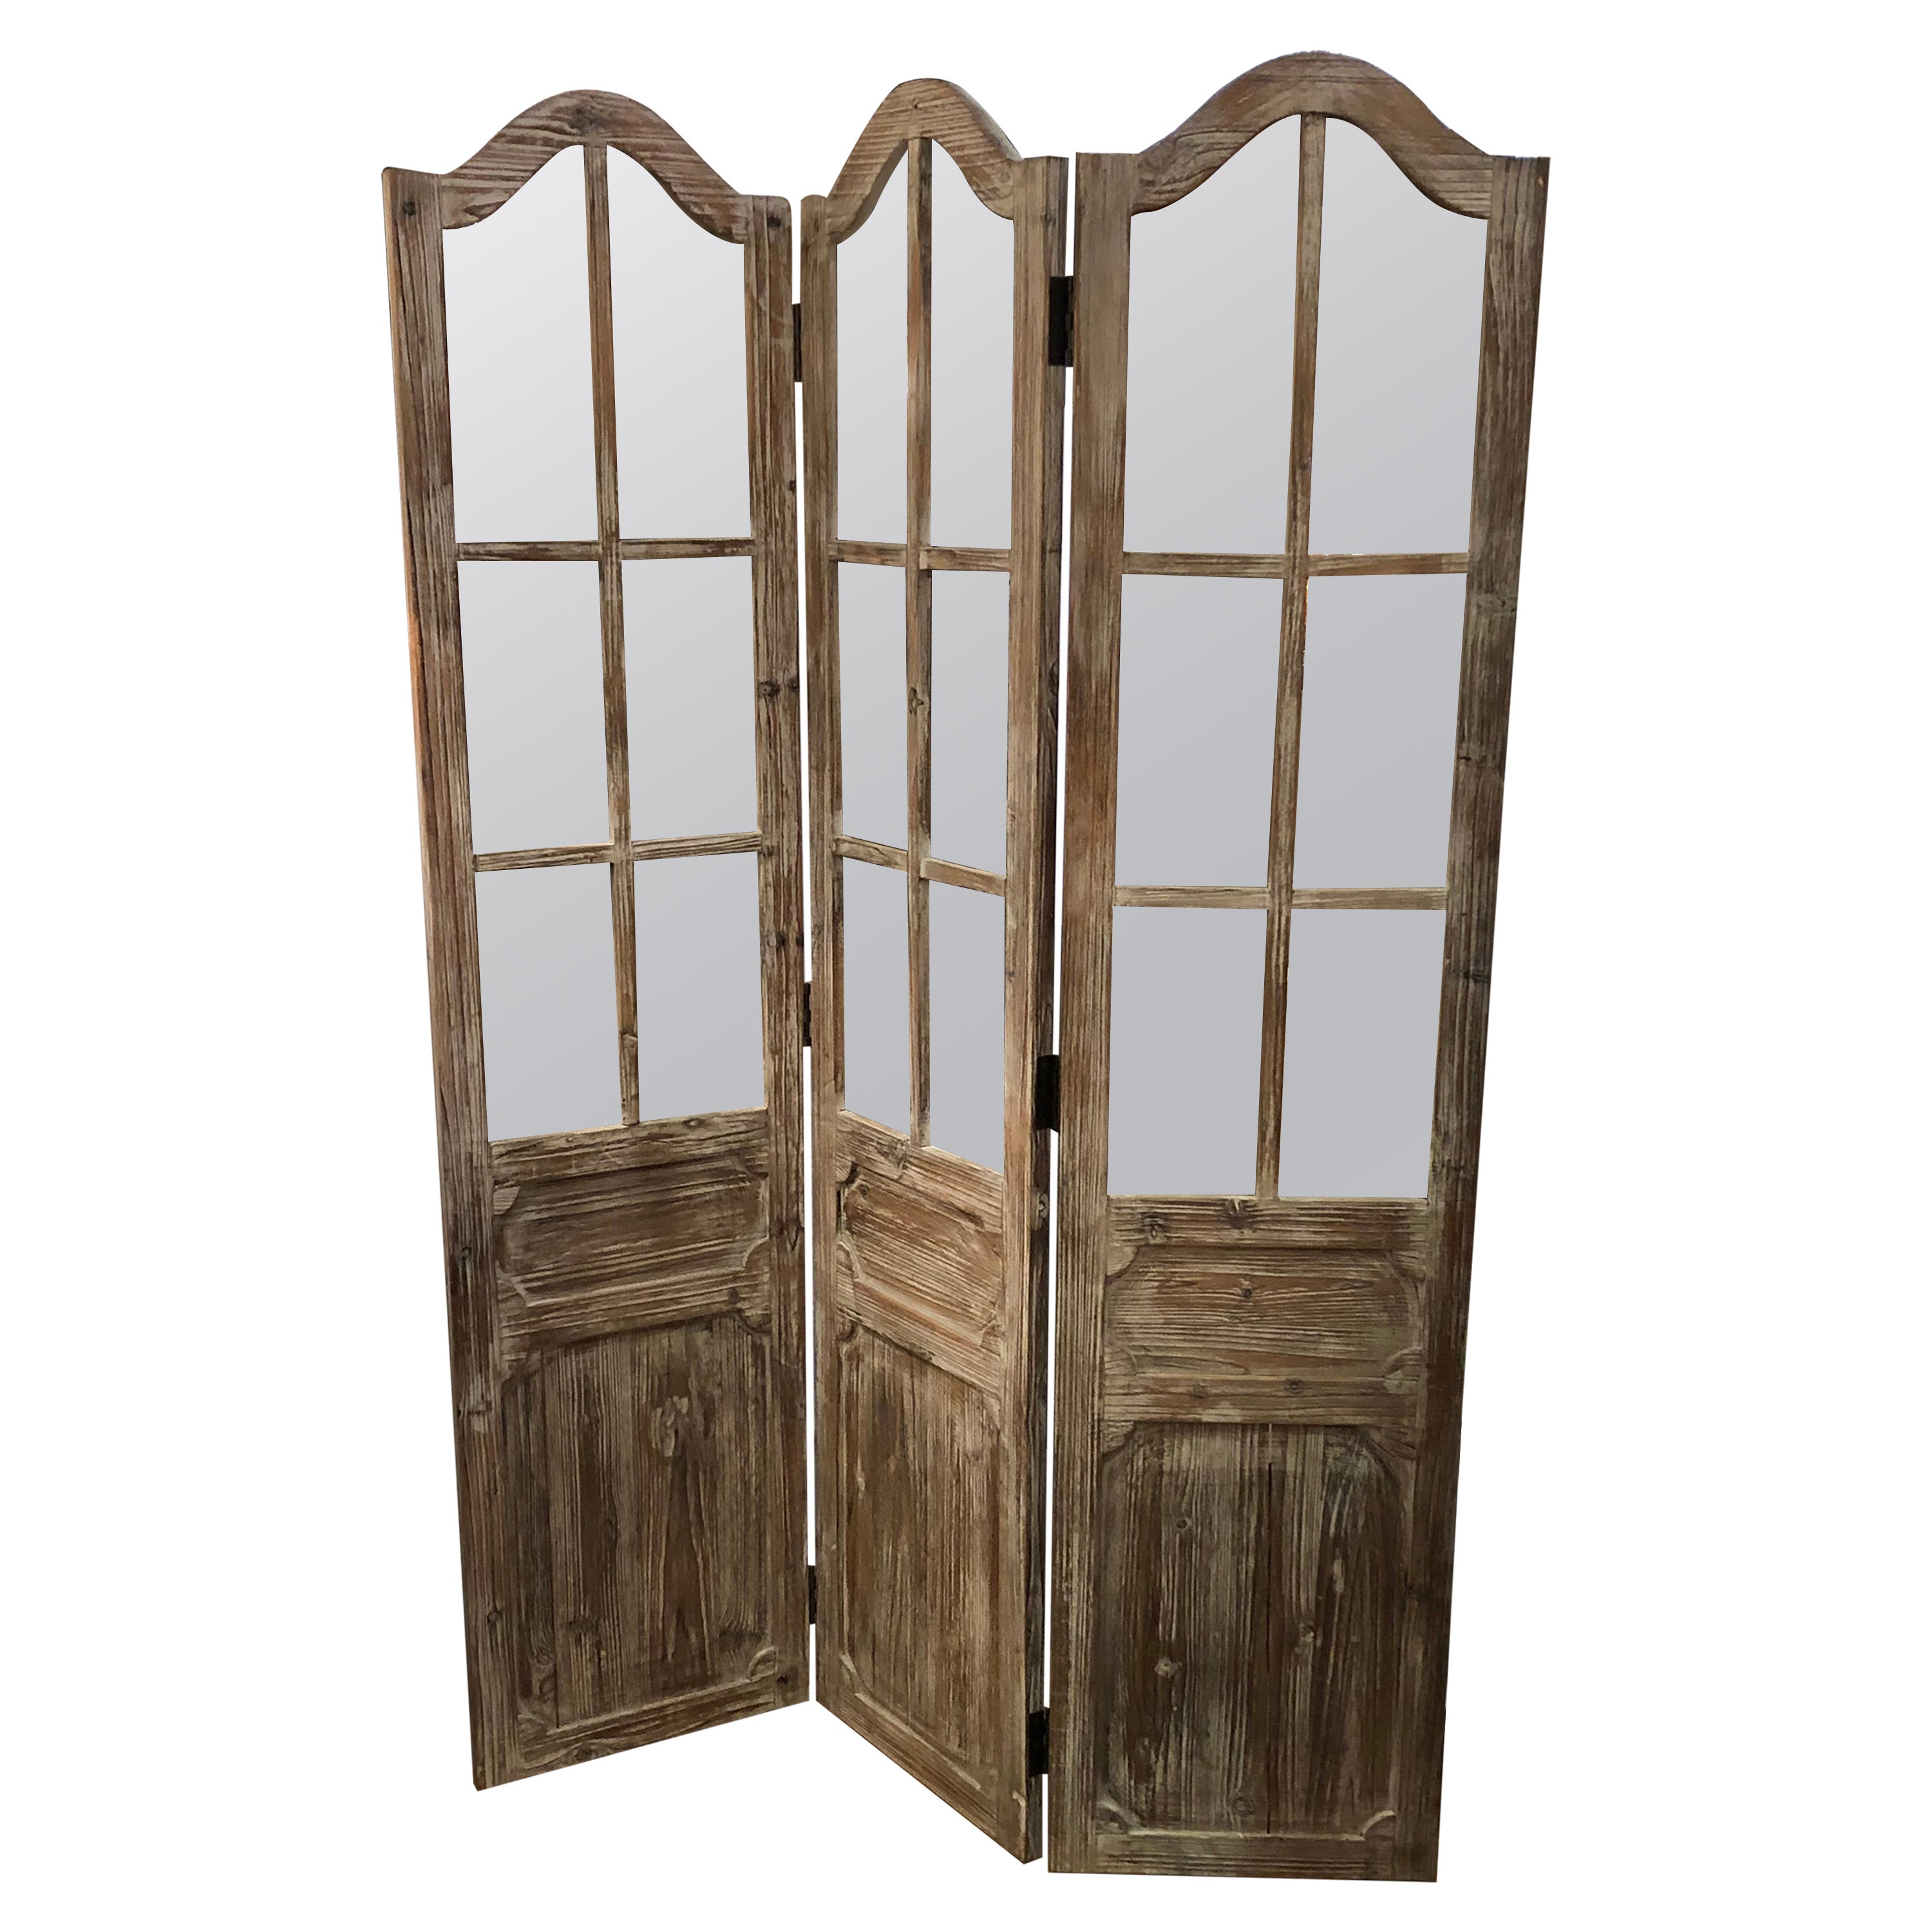 Great Looking Distressed Wood 3 Panel Screen Room Divider